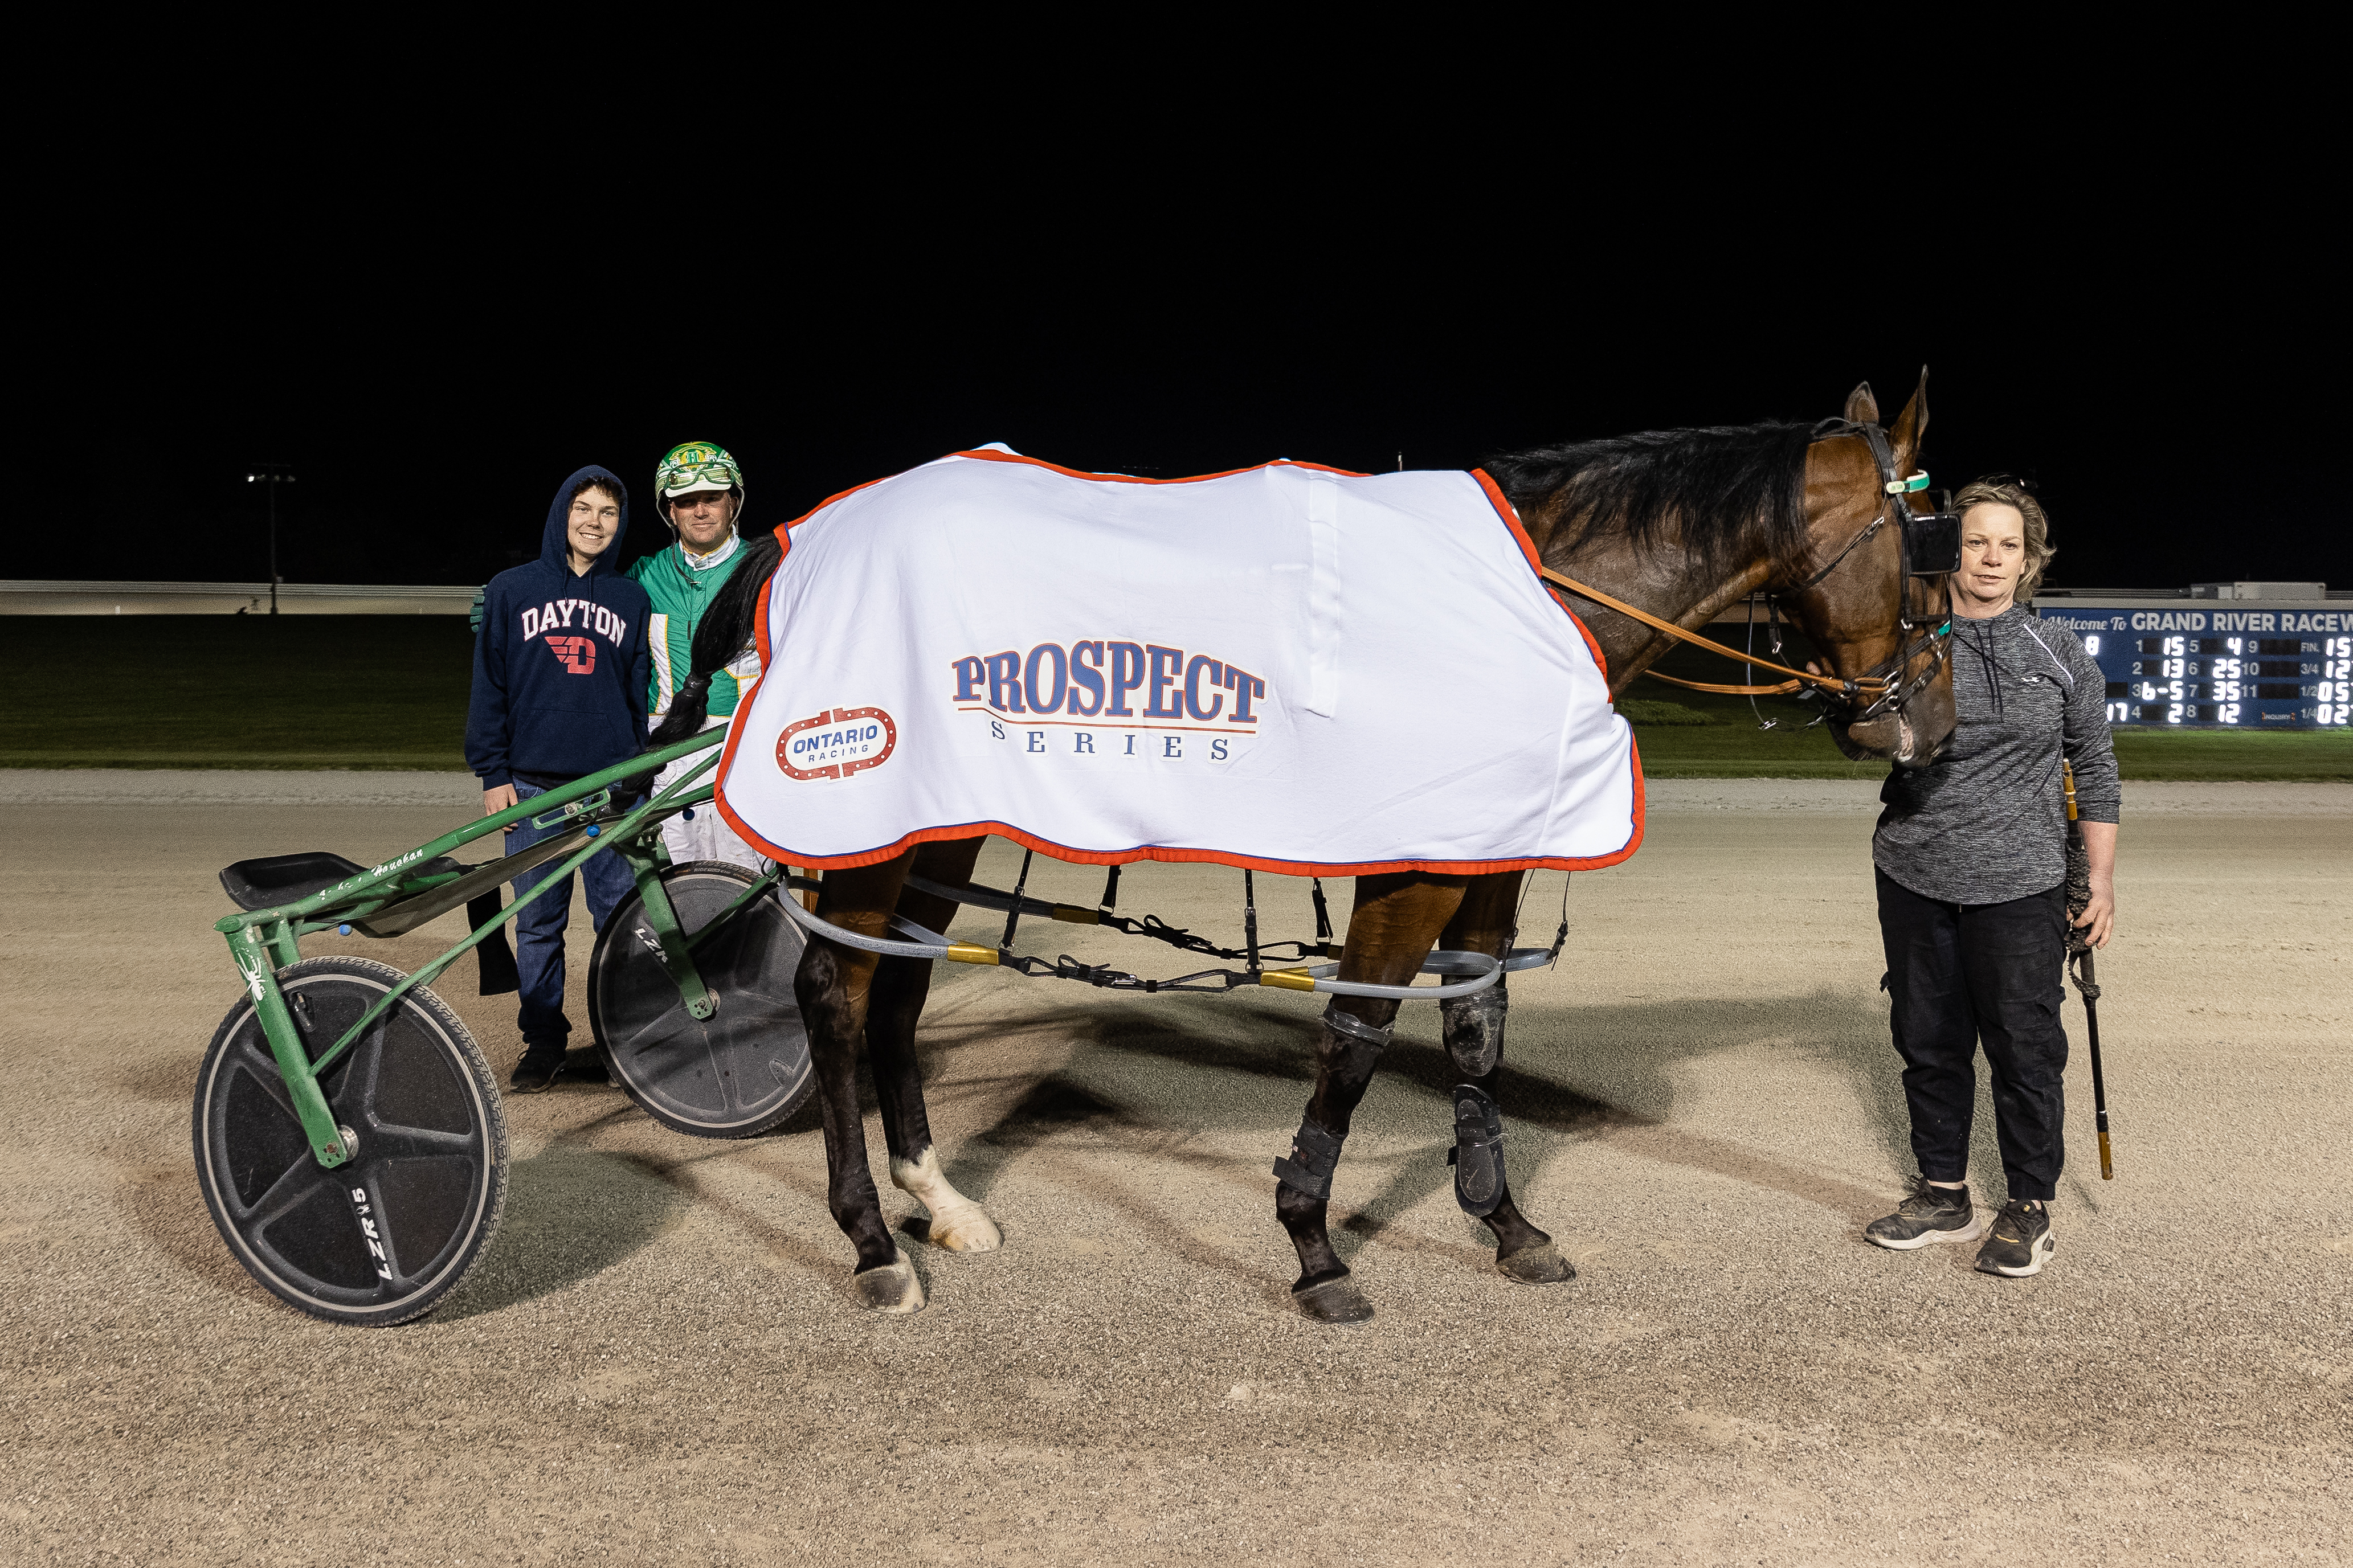 Prospect Series Pacing Finals Feature Upsets